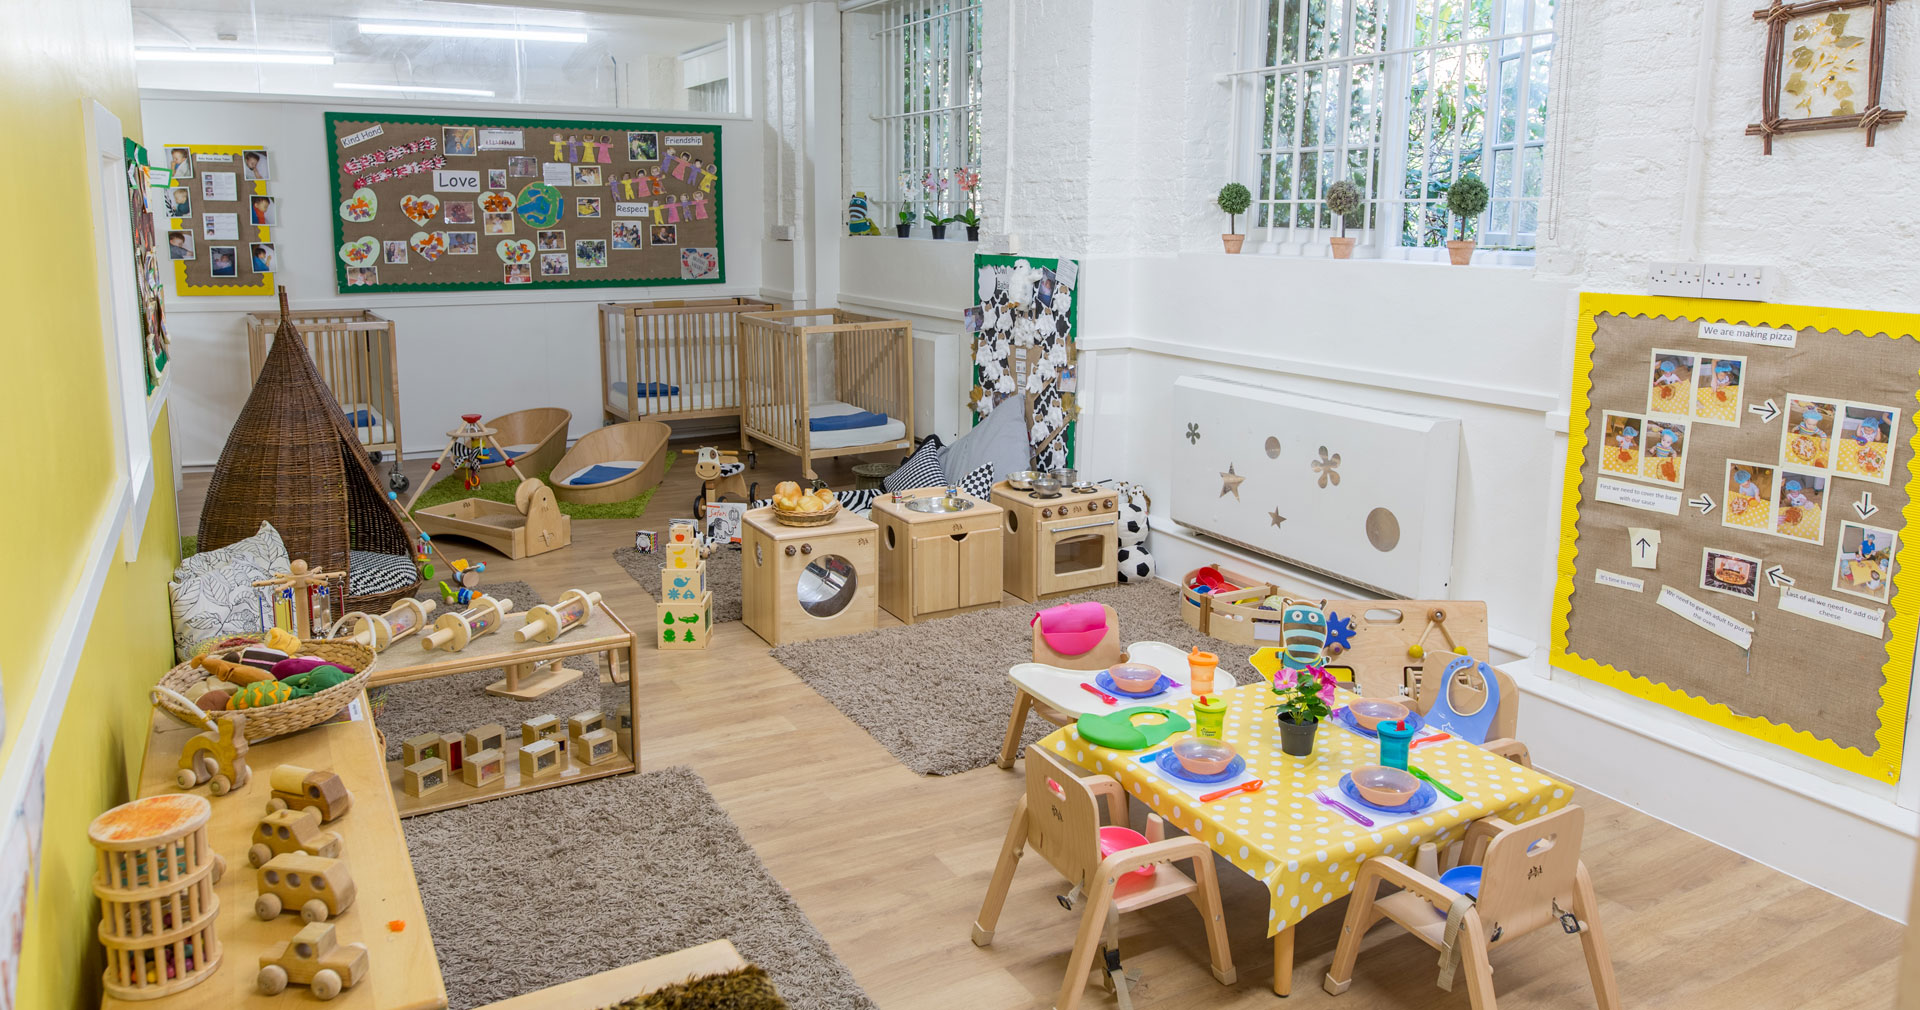 Floral Place Day Nursery and Preschool